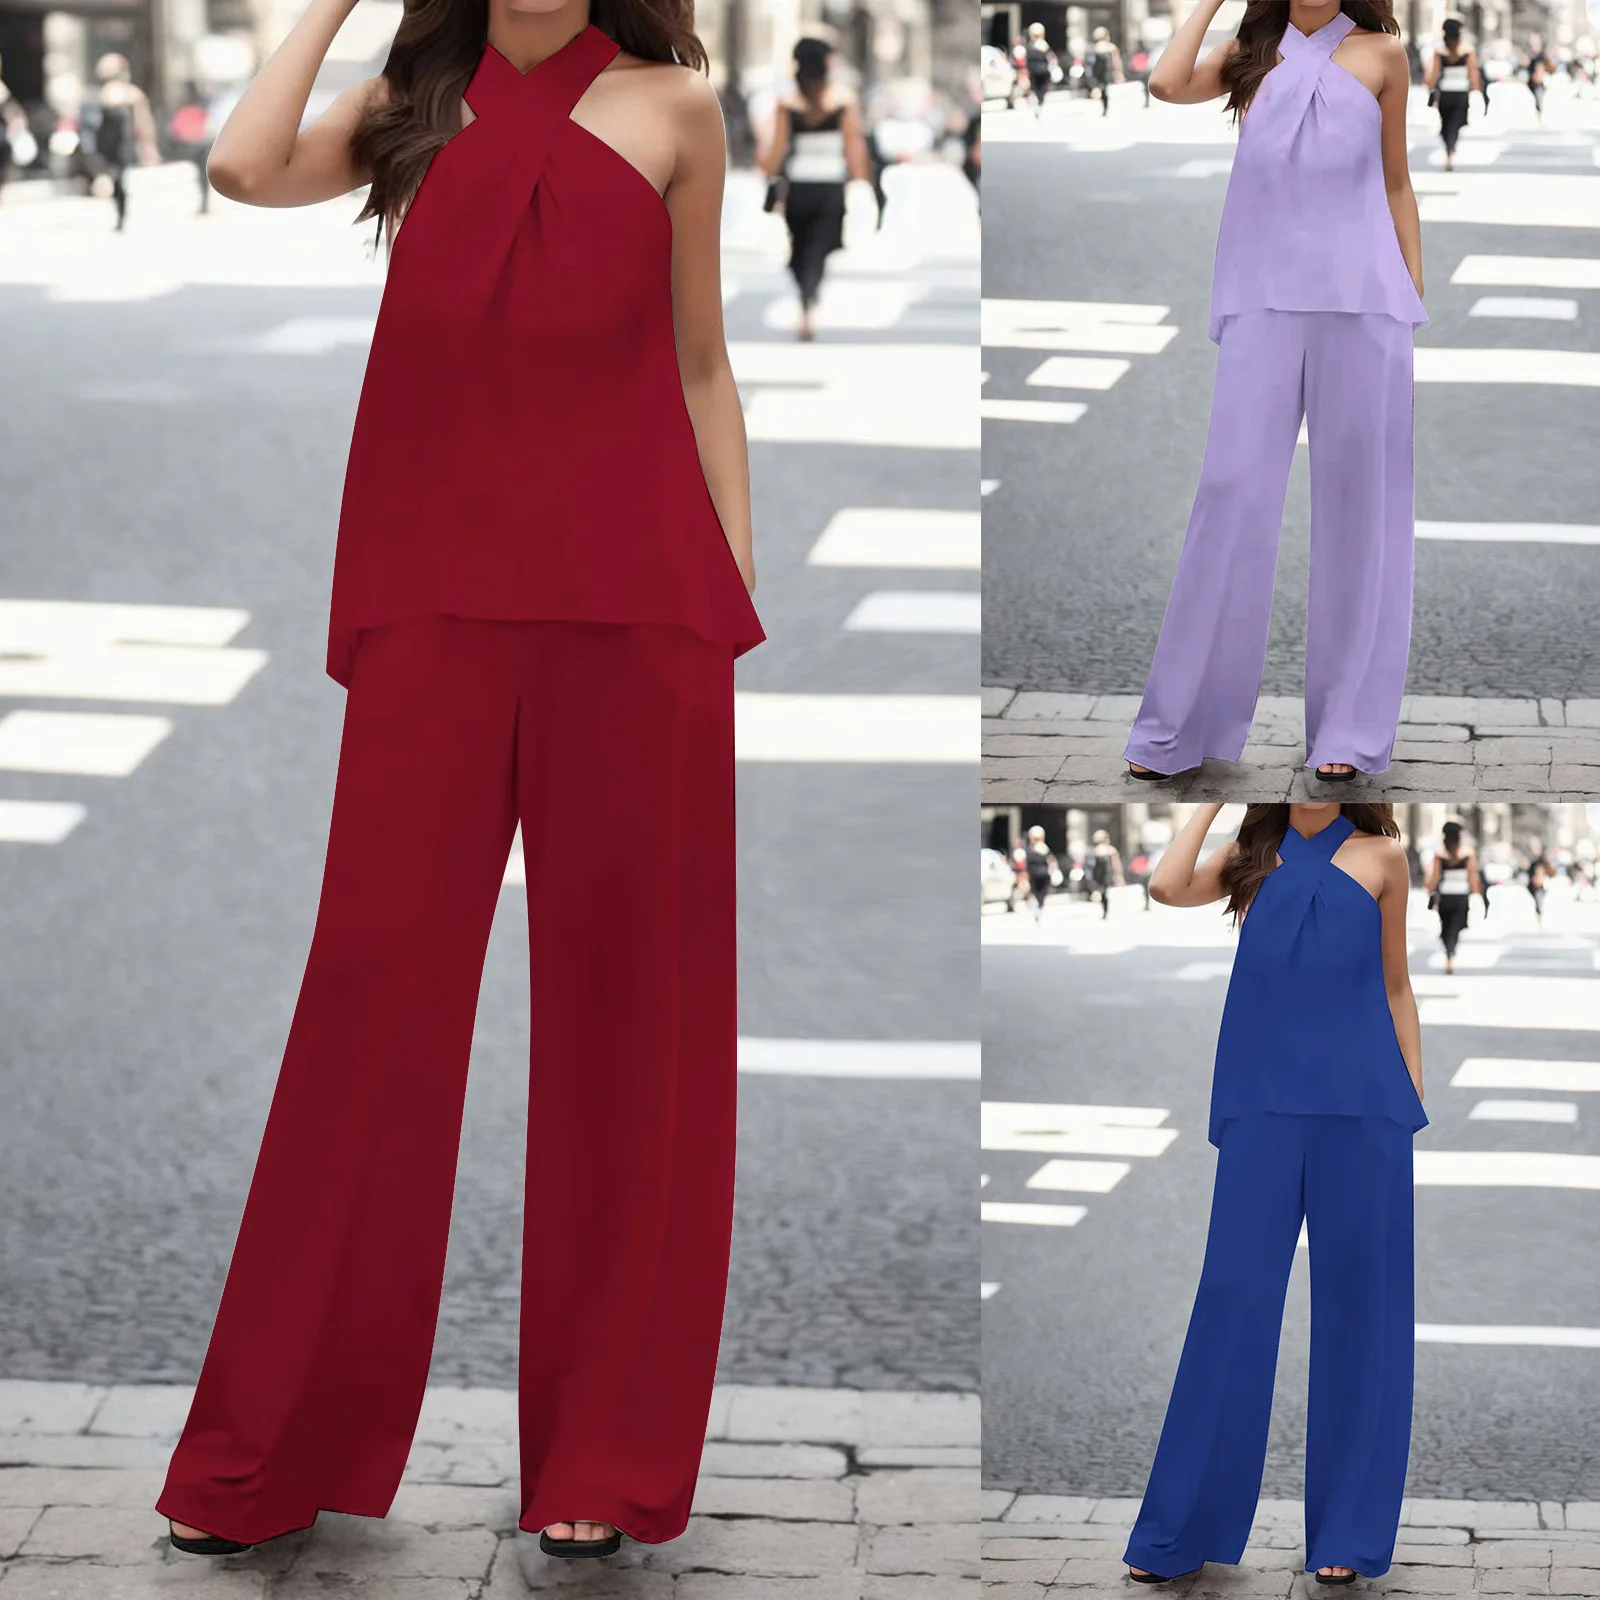 

Jumpsuits for Women Dressy Romper Pants Suits Rompers Pantsuit Jumper One Piece Outfit Loose Wide Leg Casual Sexy Clothes